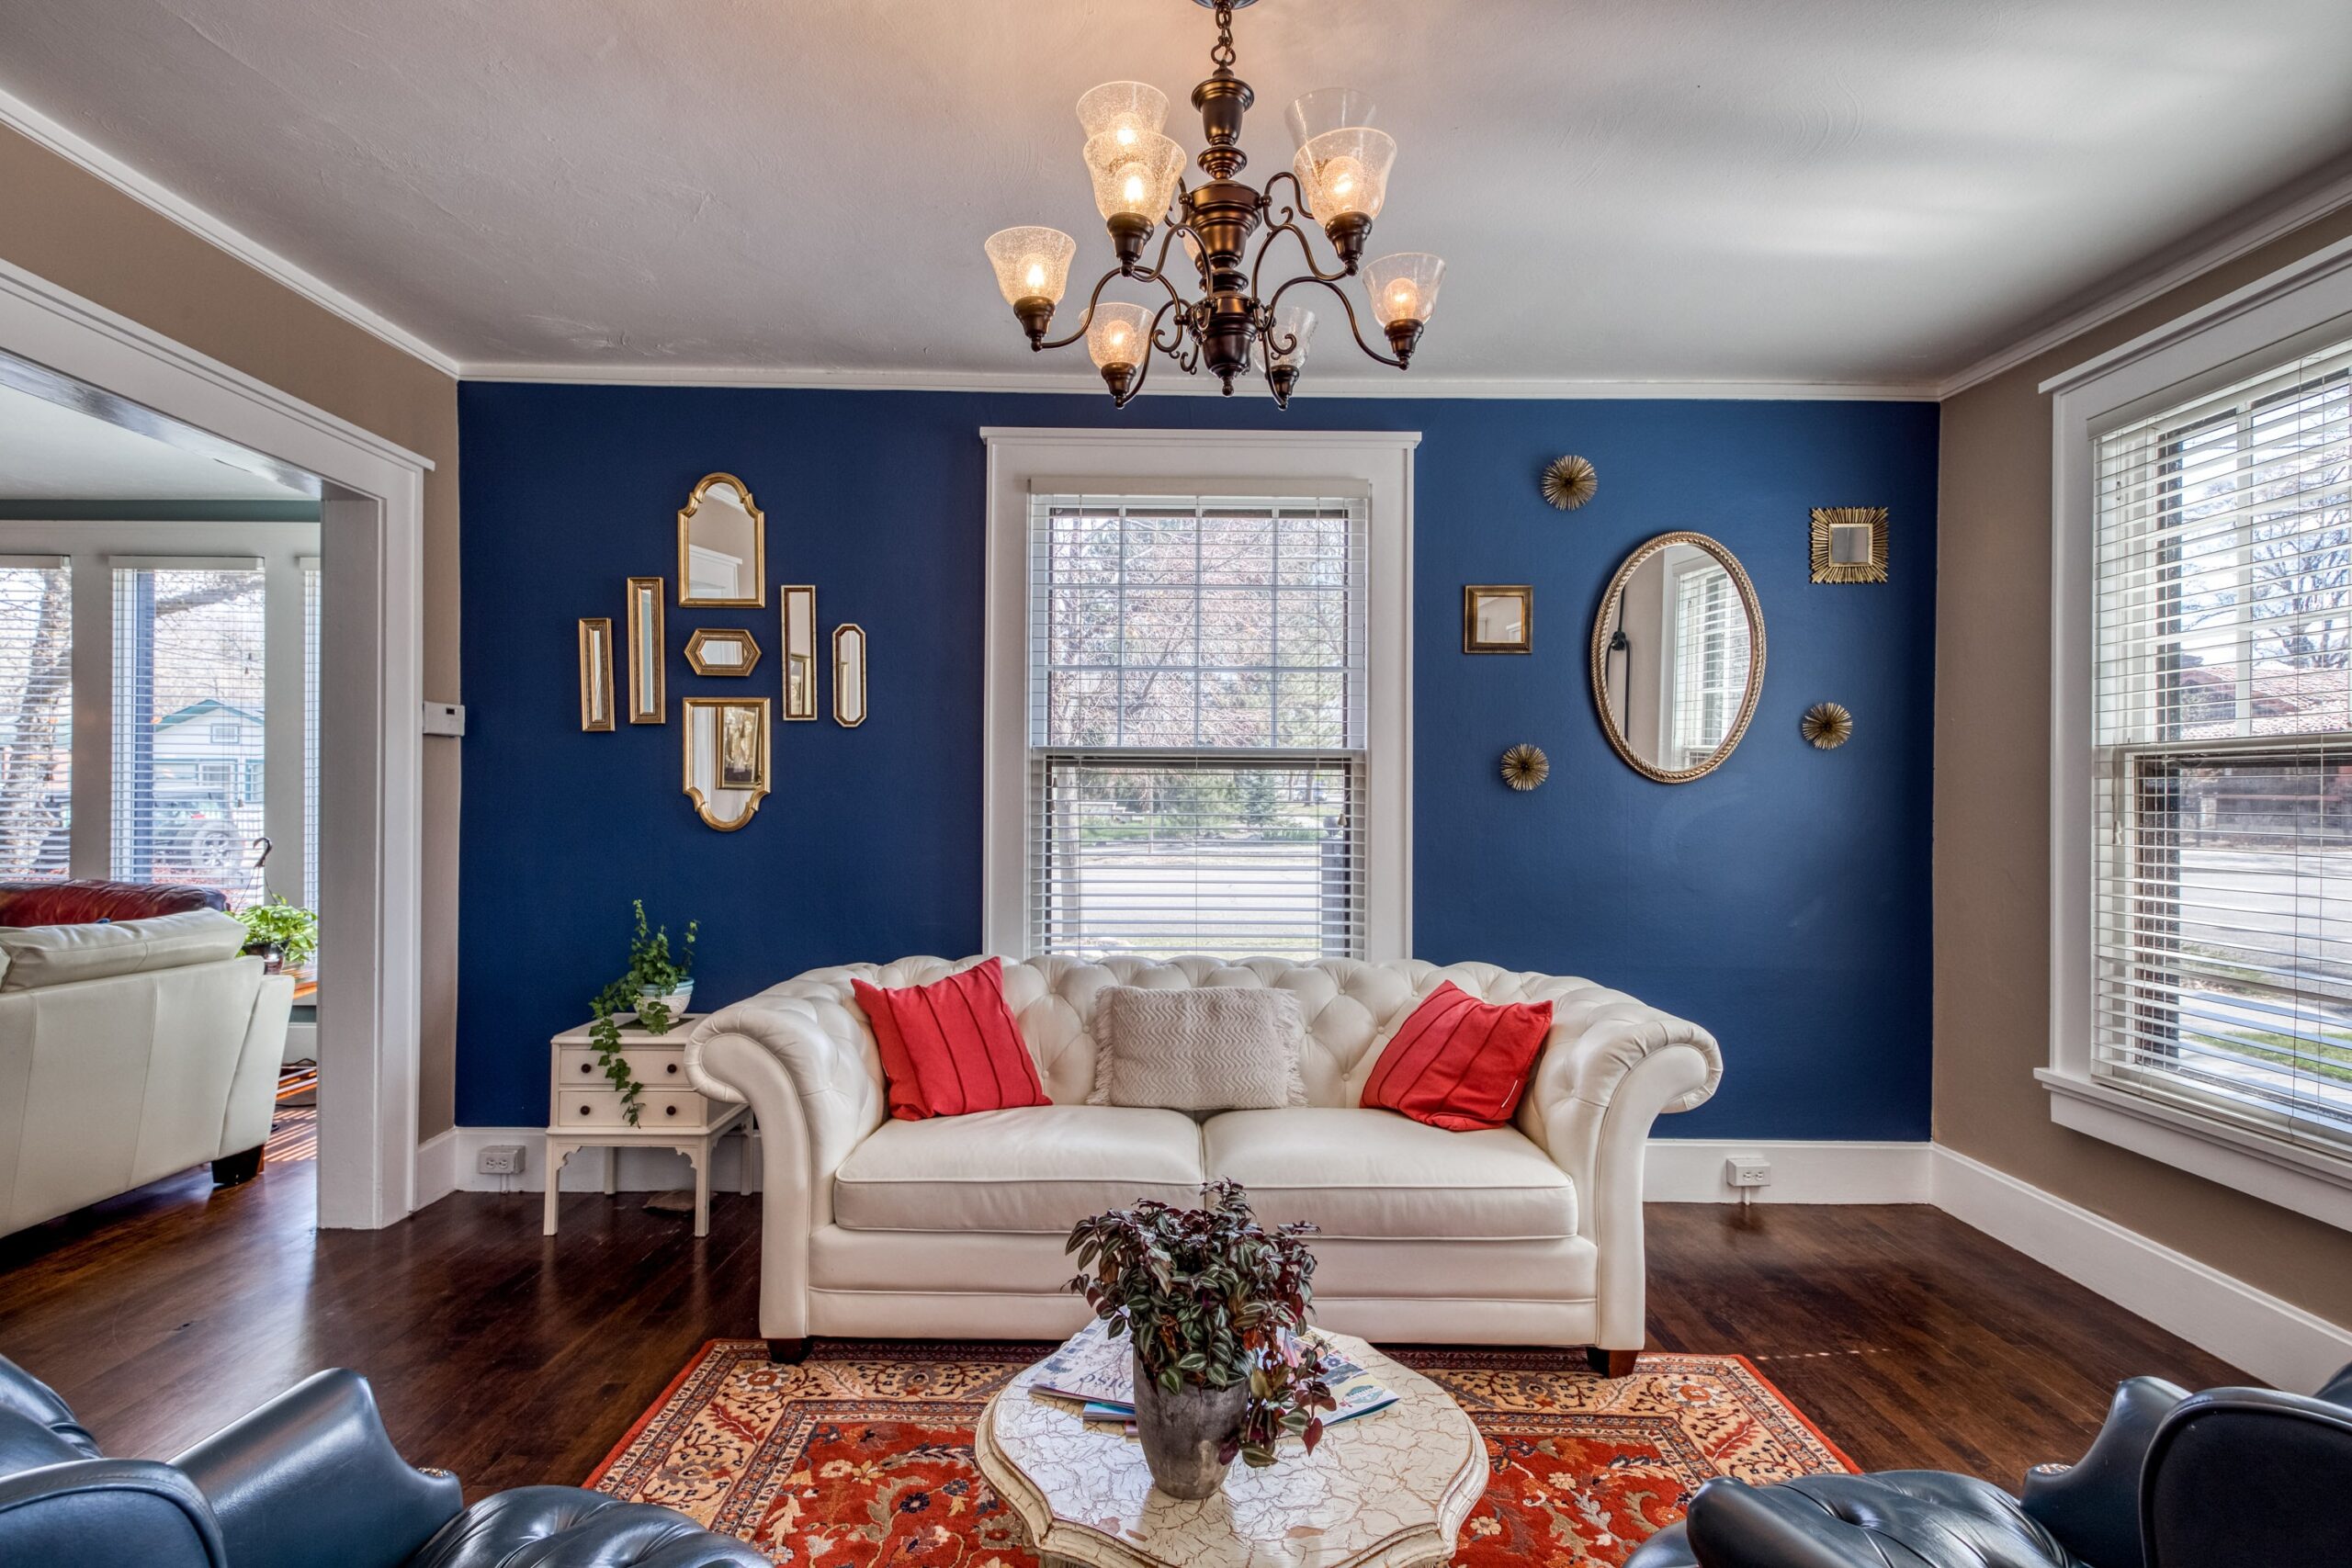 What Color Carpet Goes With Blue Walls – The Home Answer